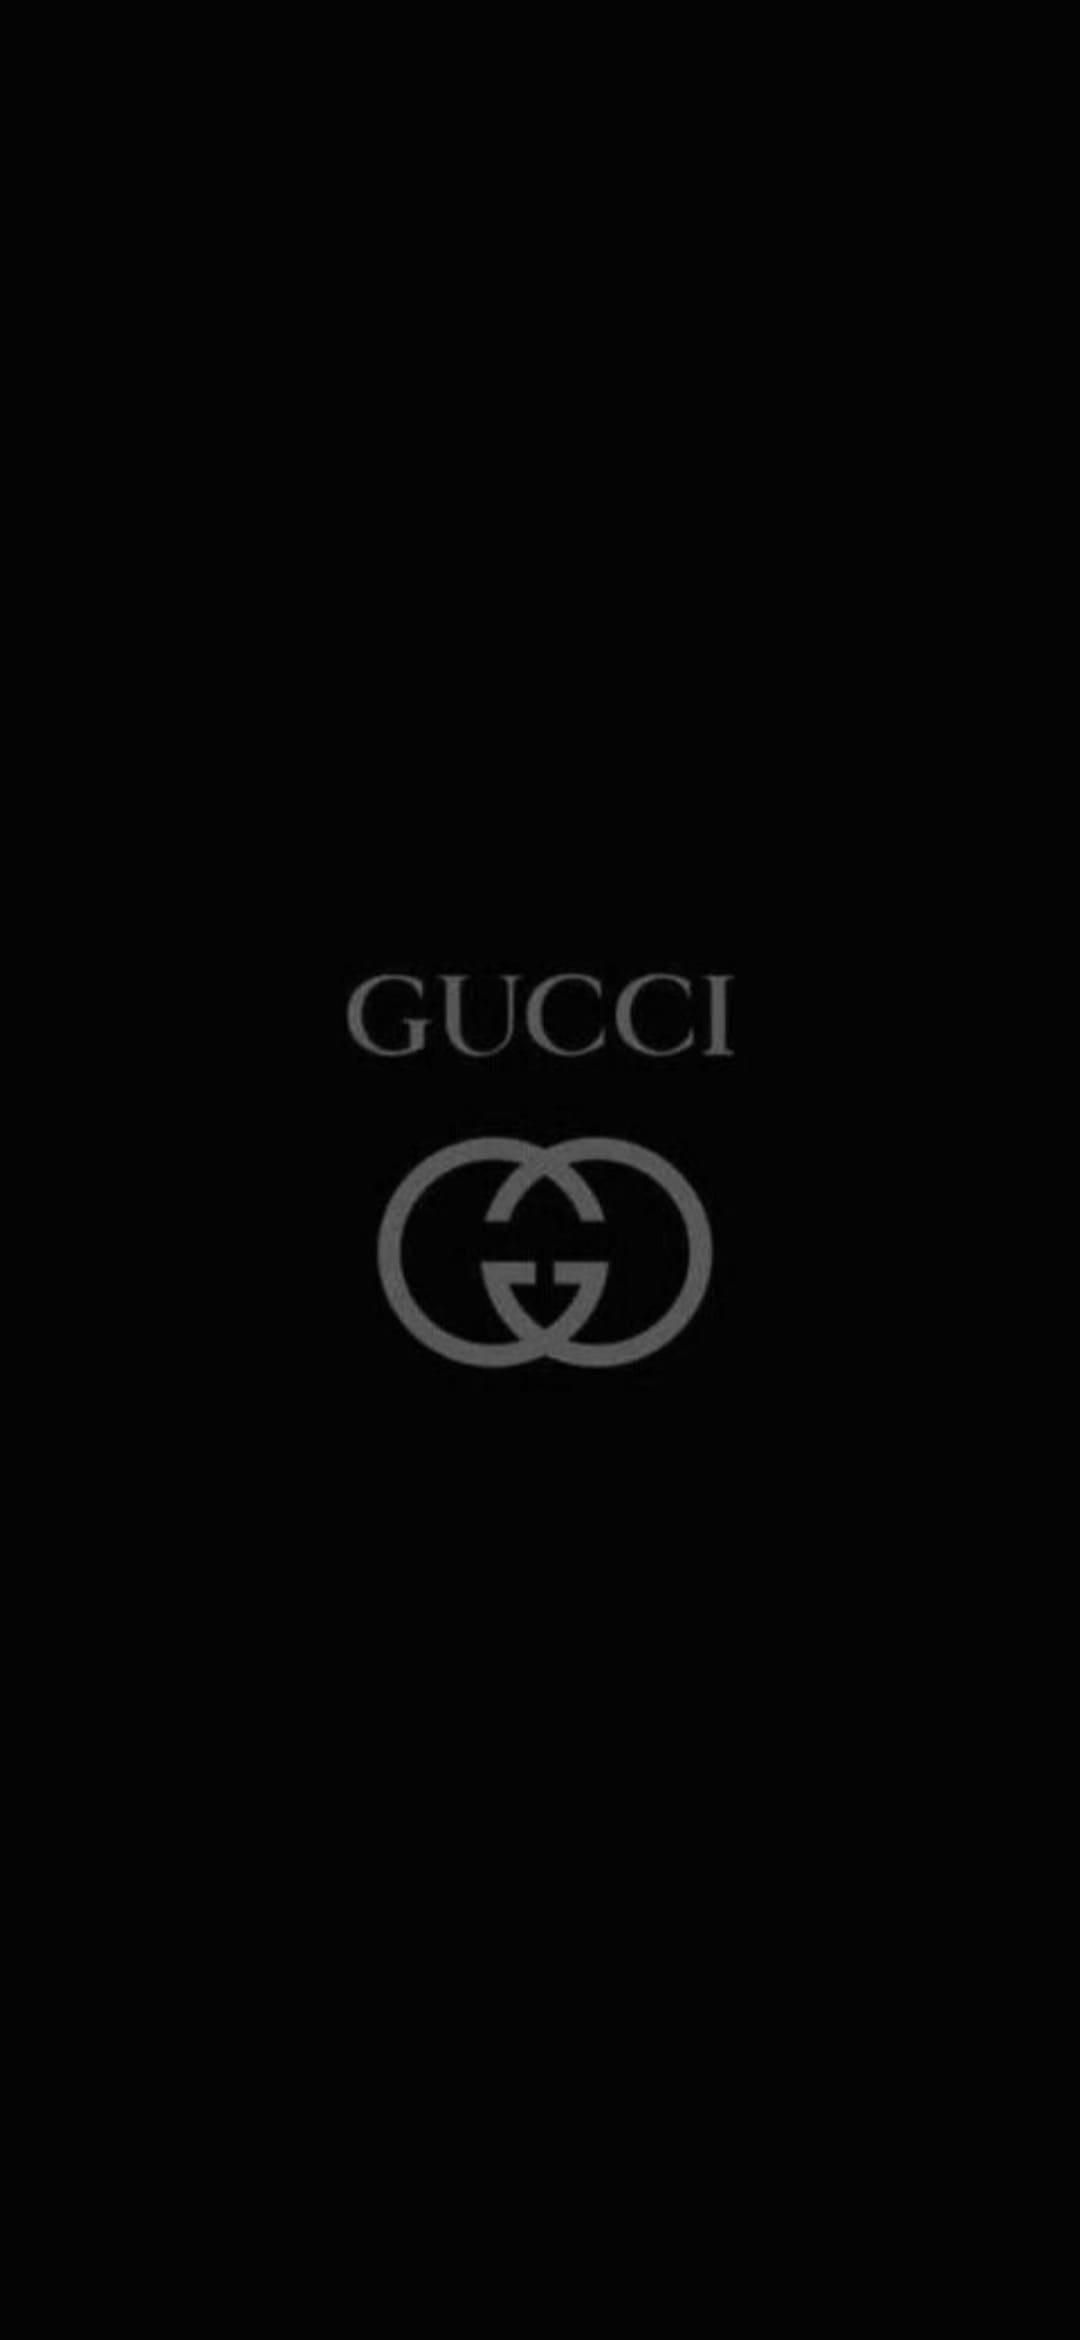 Gucci: An Italian high-end luxury fashion house based in Florence, Italy, Black. 1080x2340 HD Wallpaper.